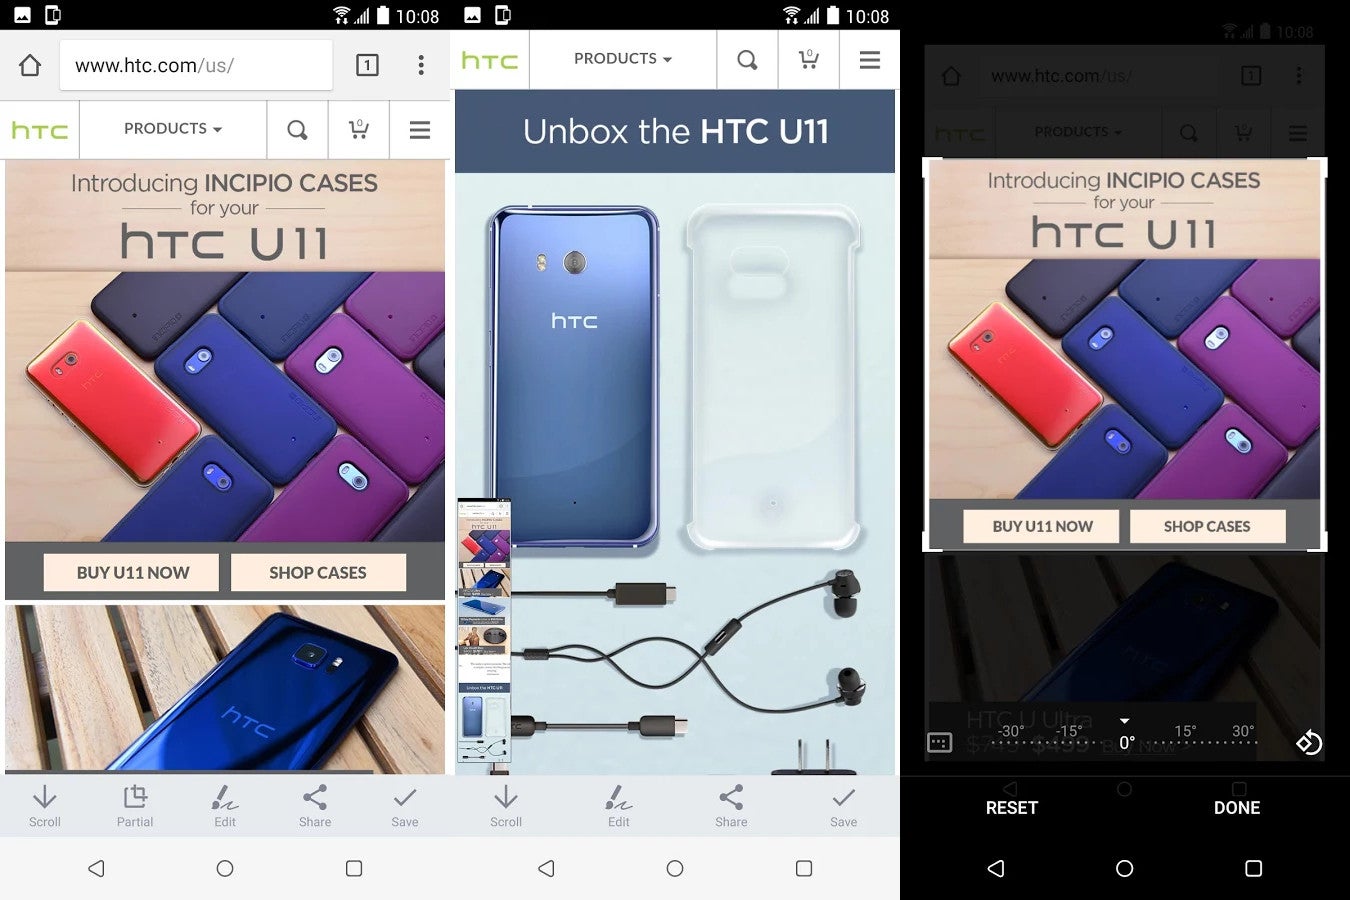 HTC releases Screen Capture tool in the Google Play Store, so you can screenshot away